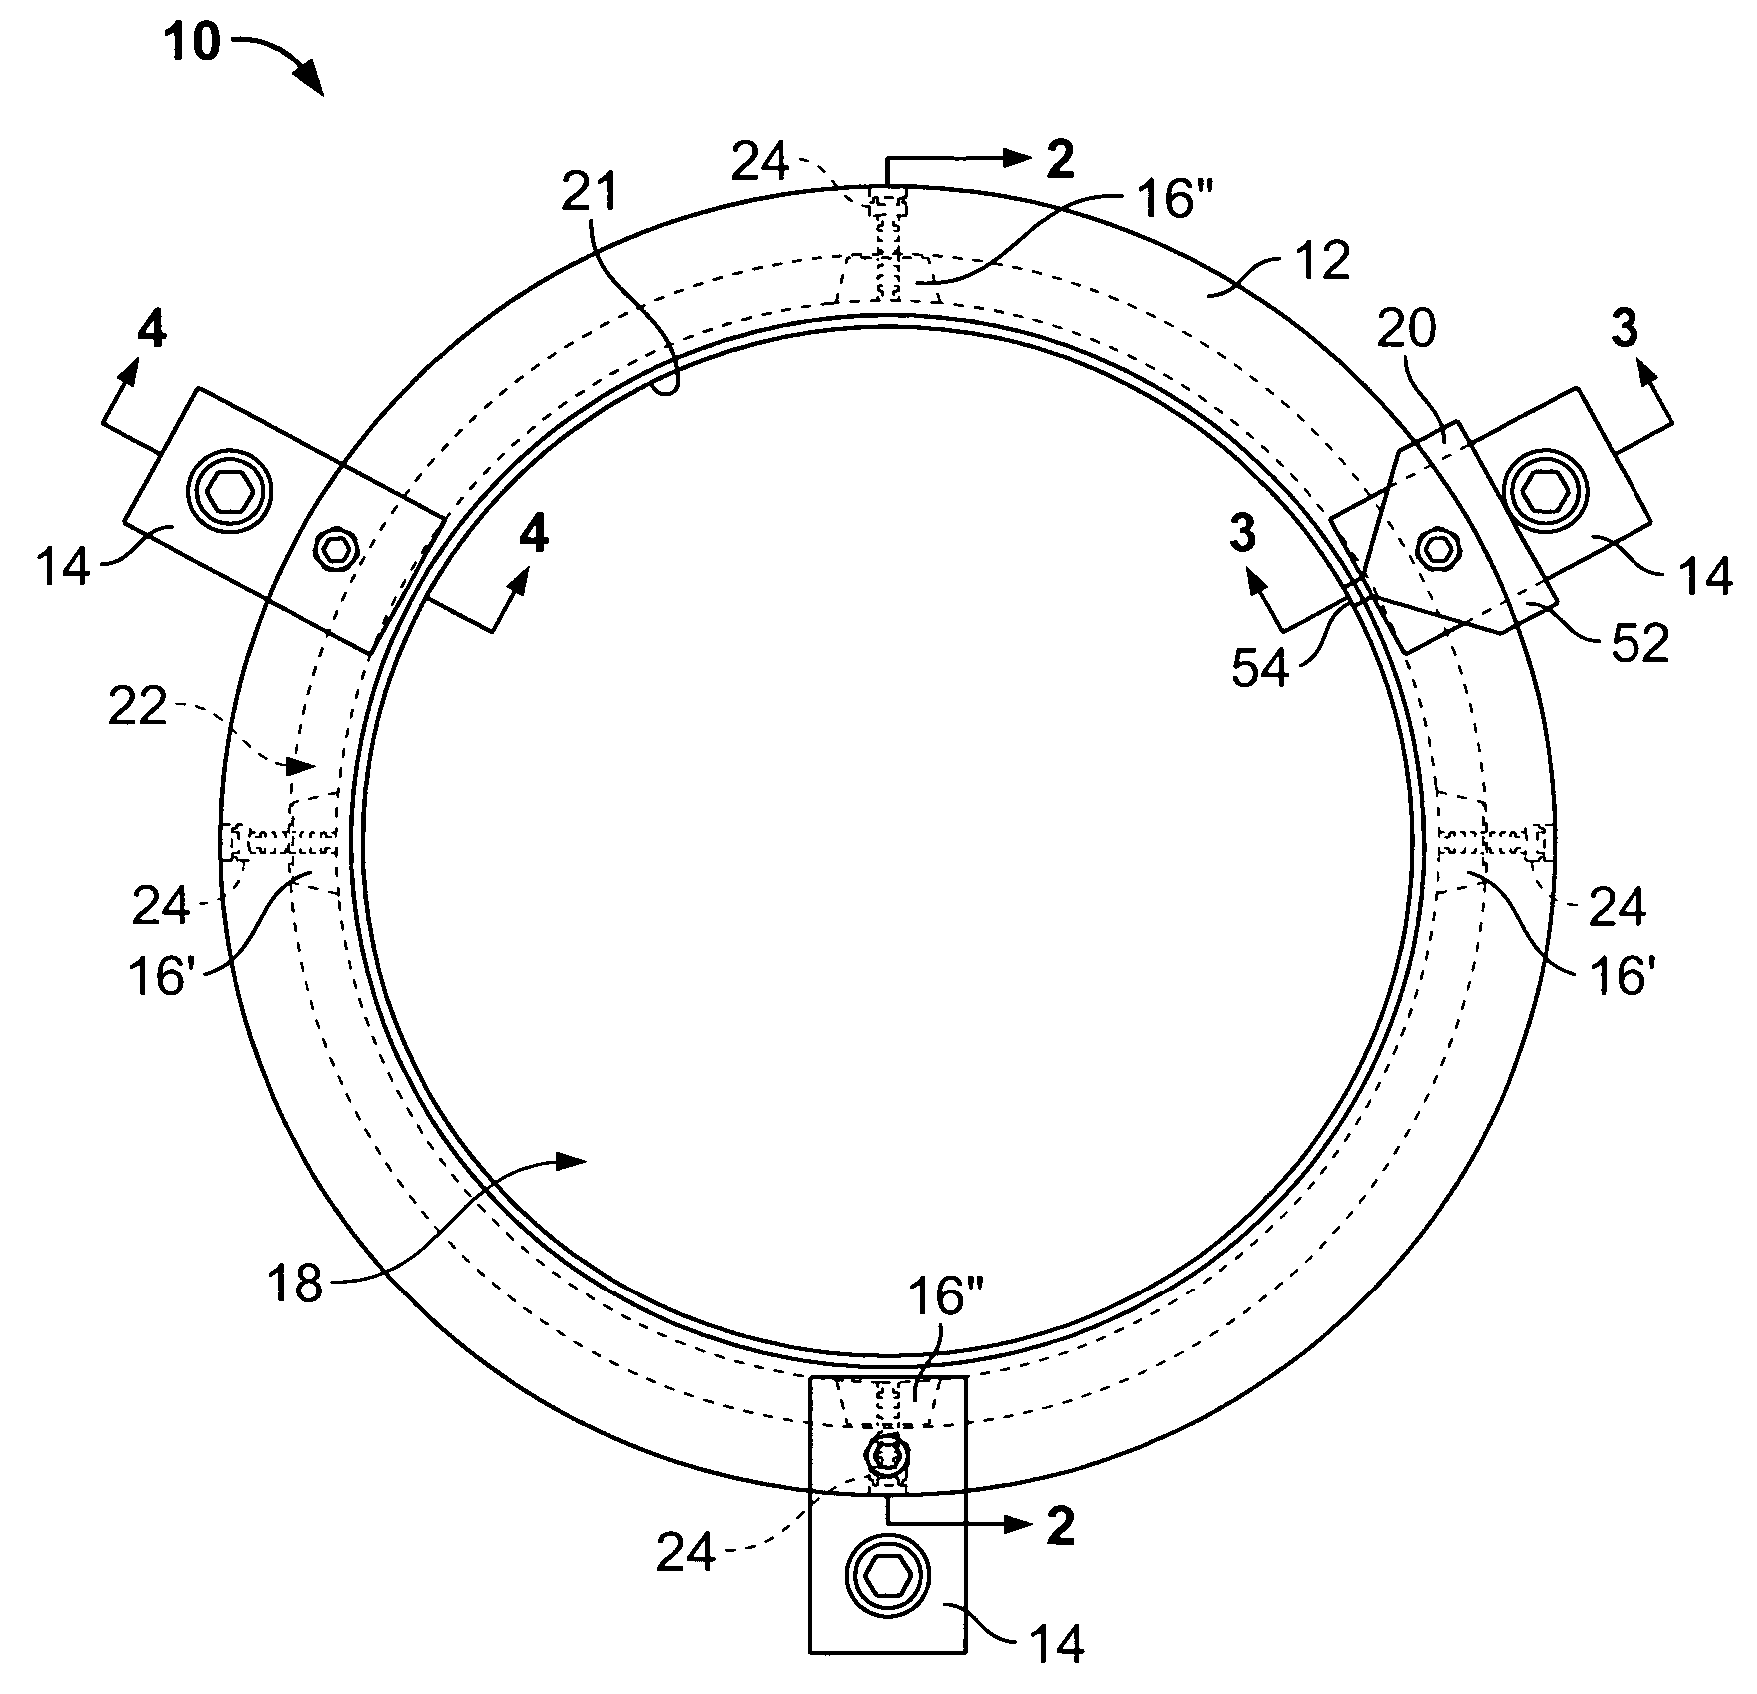 Grounding system for a rotating shaft